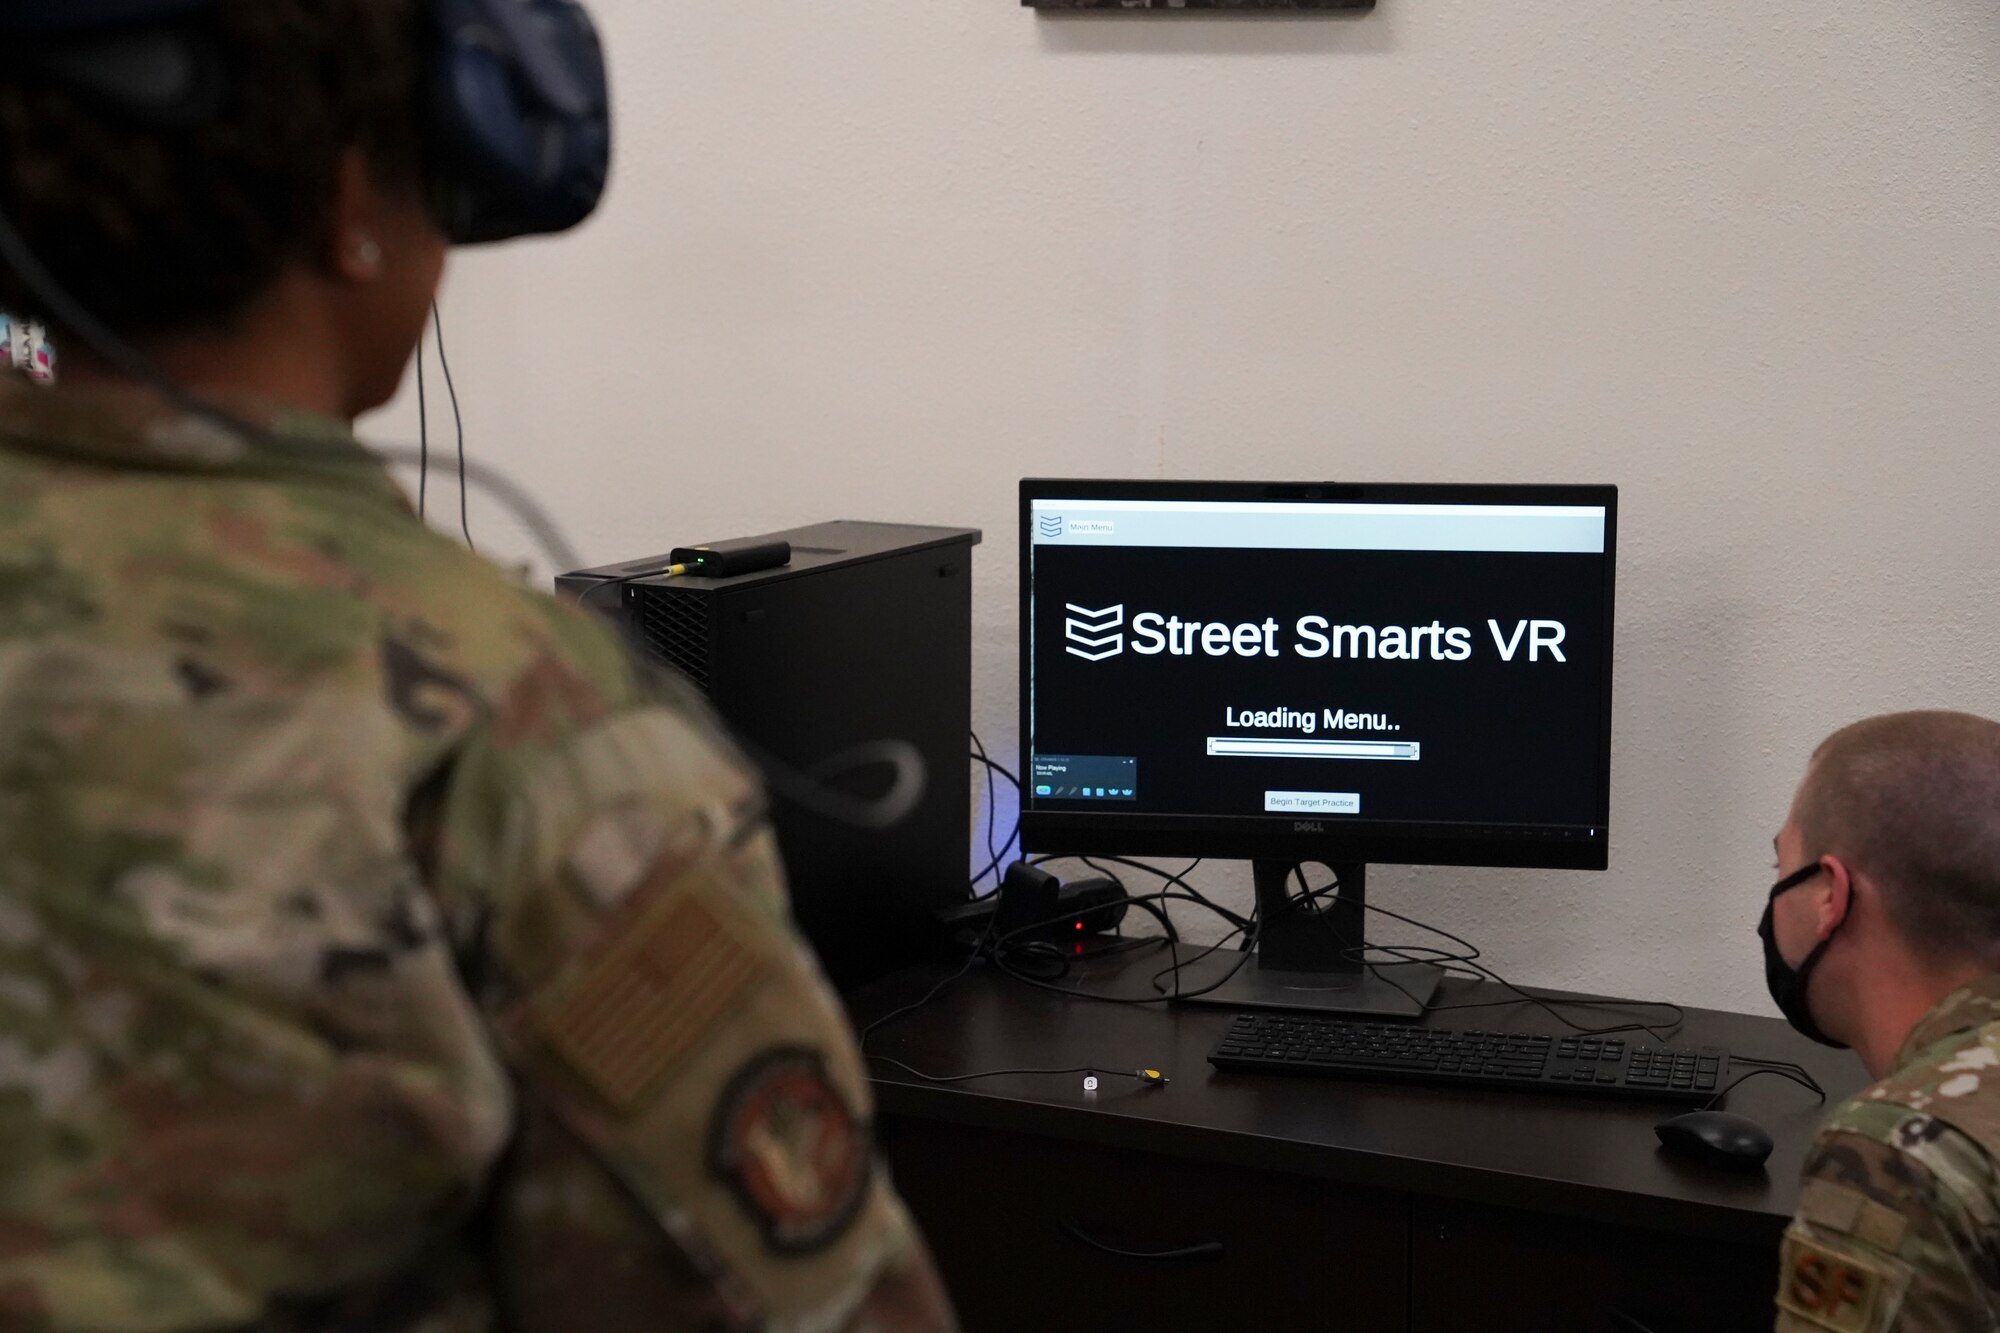 U.S. Air Force Lt. Tenisha Austin, 81st Contracting Squadron infrustructure flight commander, uses a virtual-reality system inside the security forces building at Keesler Air Force Base, Missisippi, July 15, 2021. The 81st CONS is responsible for providing contracting support to the 81st Training Wing, tenant units and other Defense Department missions across the globe. (U.S. Air Force photo by Senior Airman Spencer Tobler)